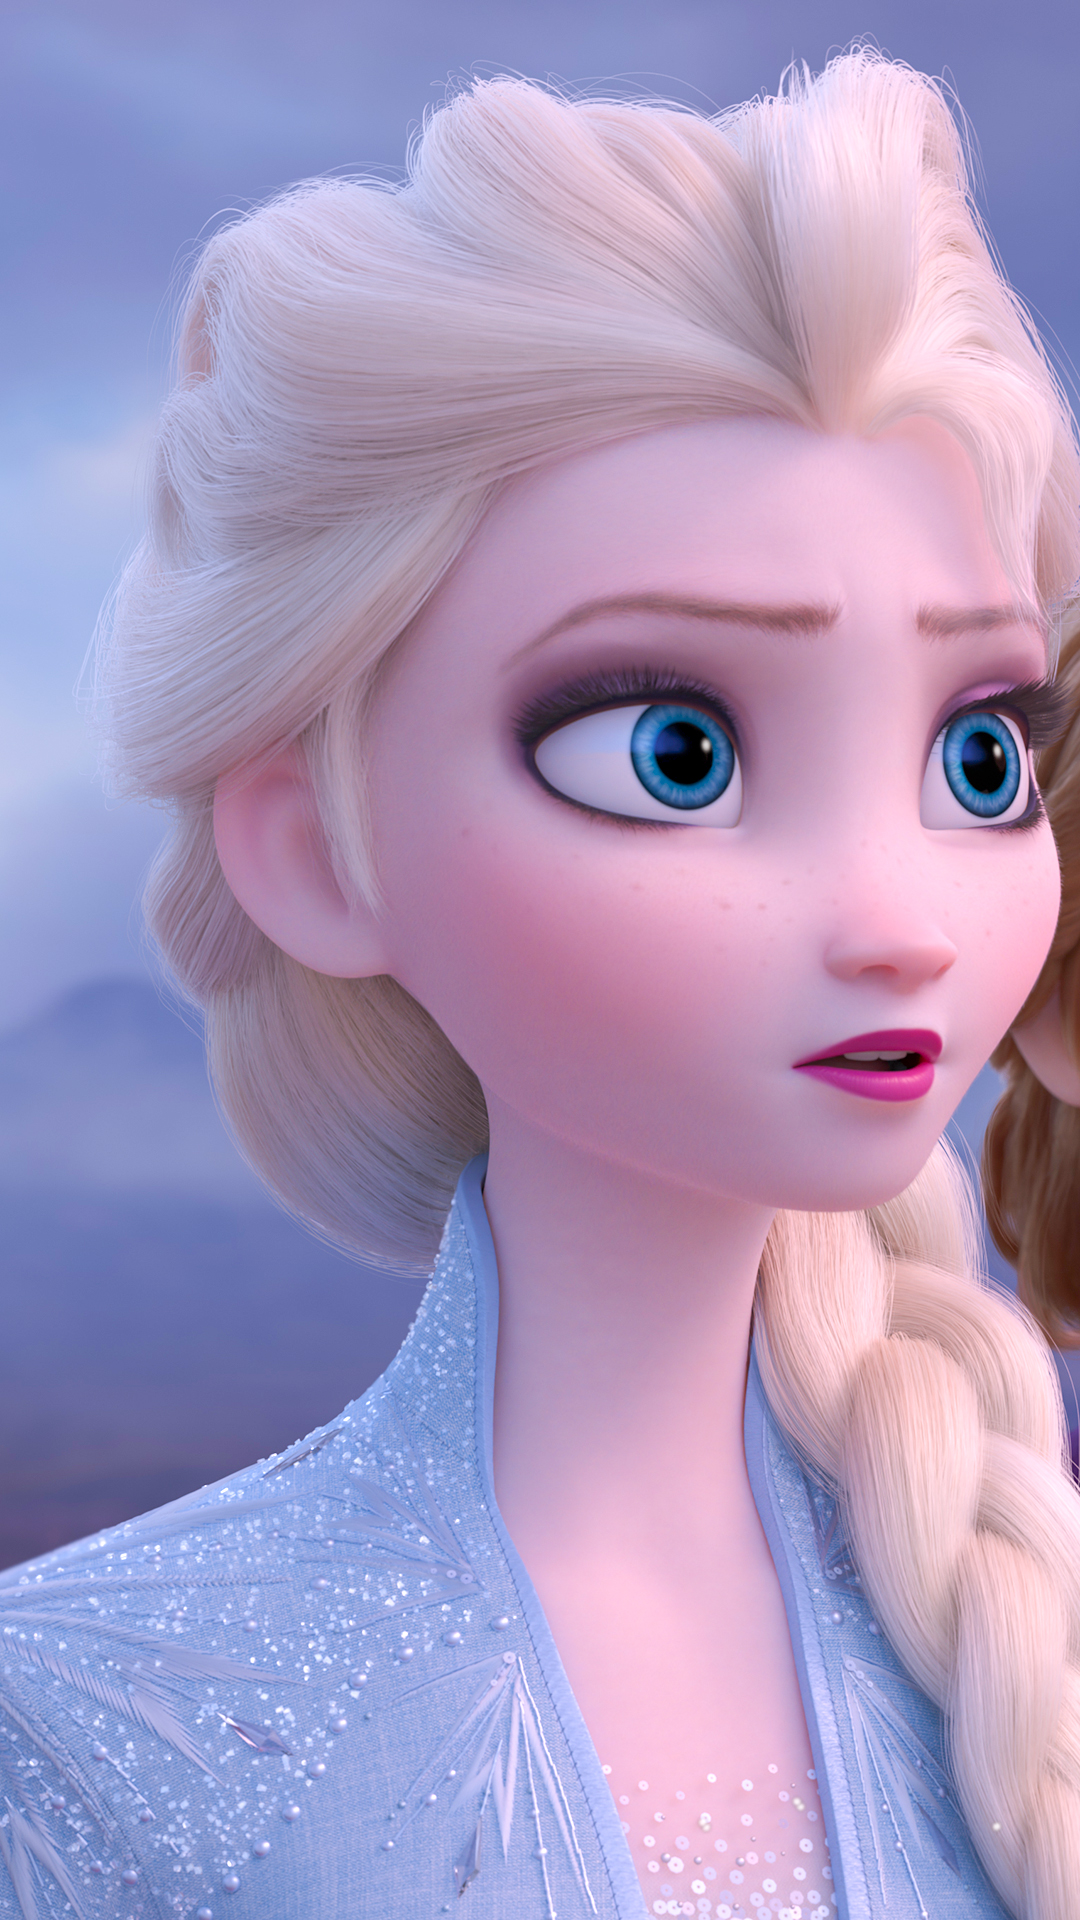 frozen wallpaper for phone,doll,barbie,face,toy,pink